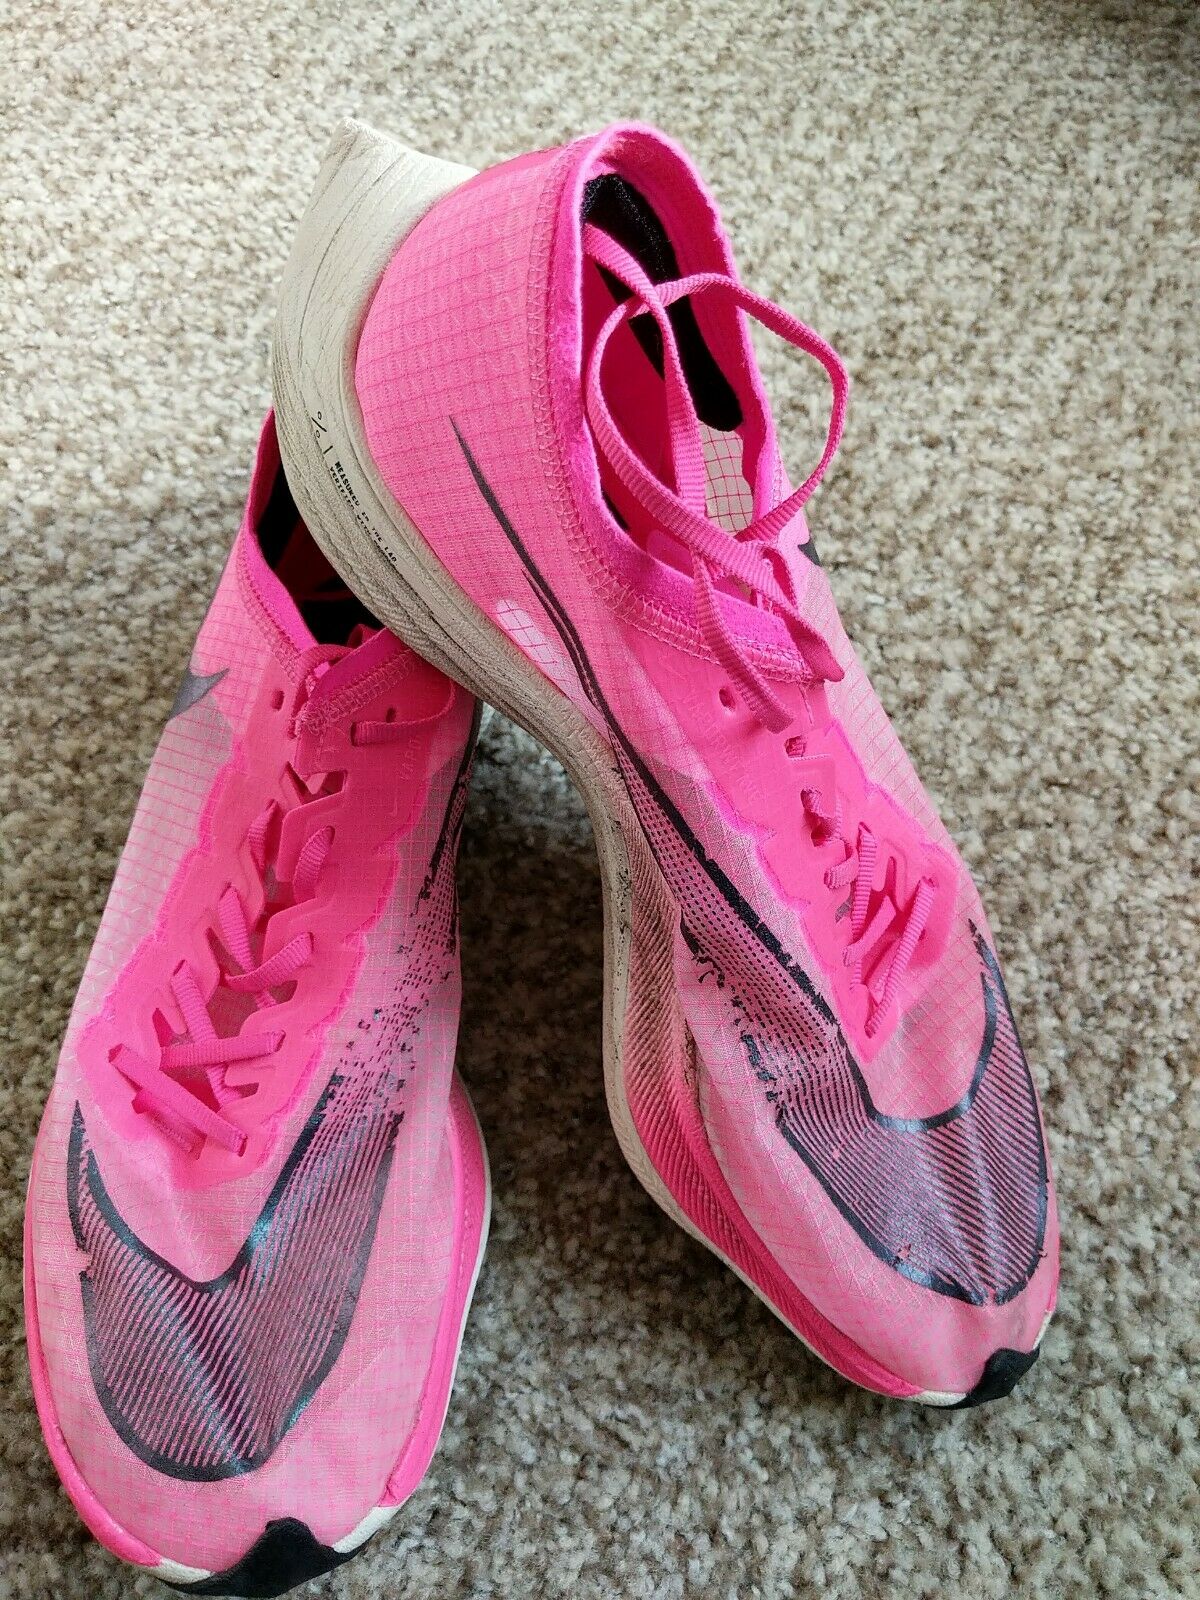 Nike ZoomX Vaporfly NEXT% Pink Blast Running Shoes Men's Size 10 Pre Owned